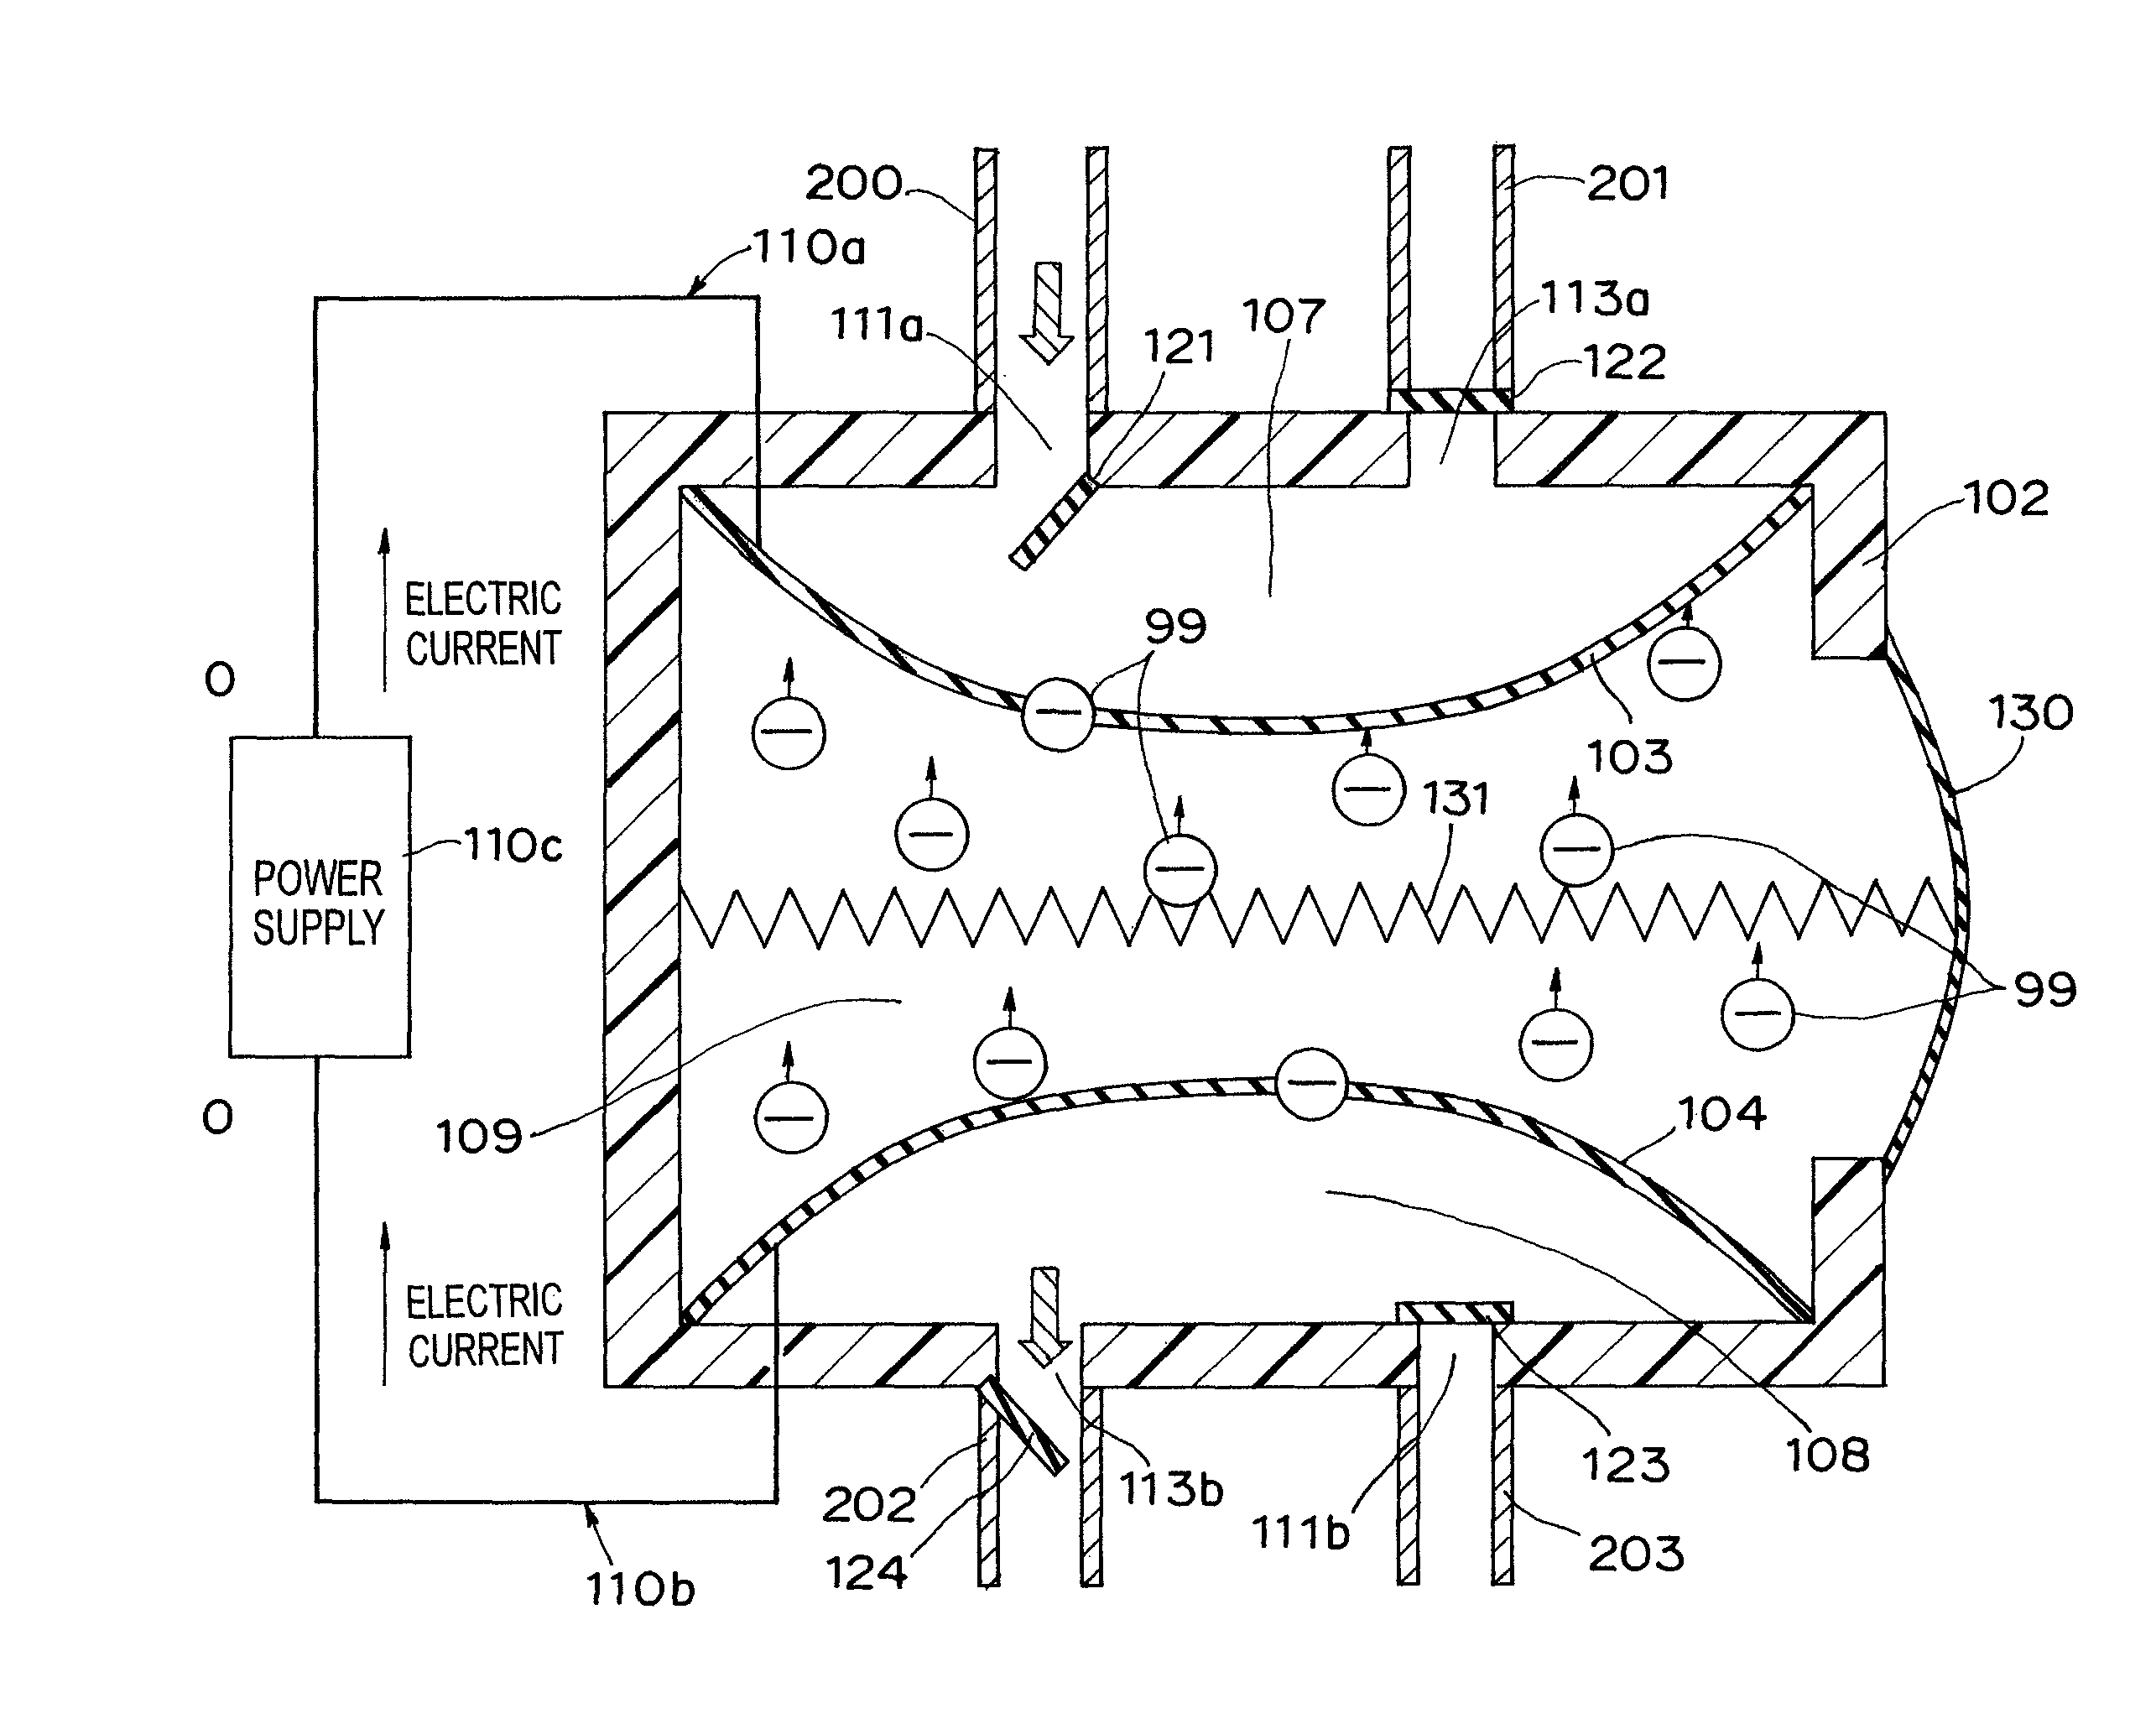 Fluid transporting device using conductive polymer